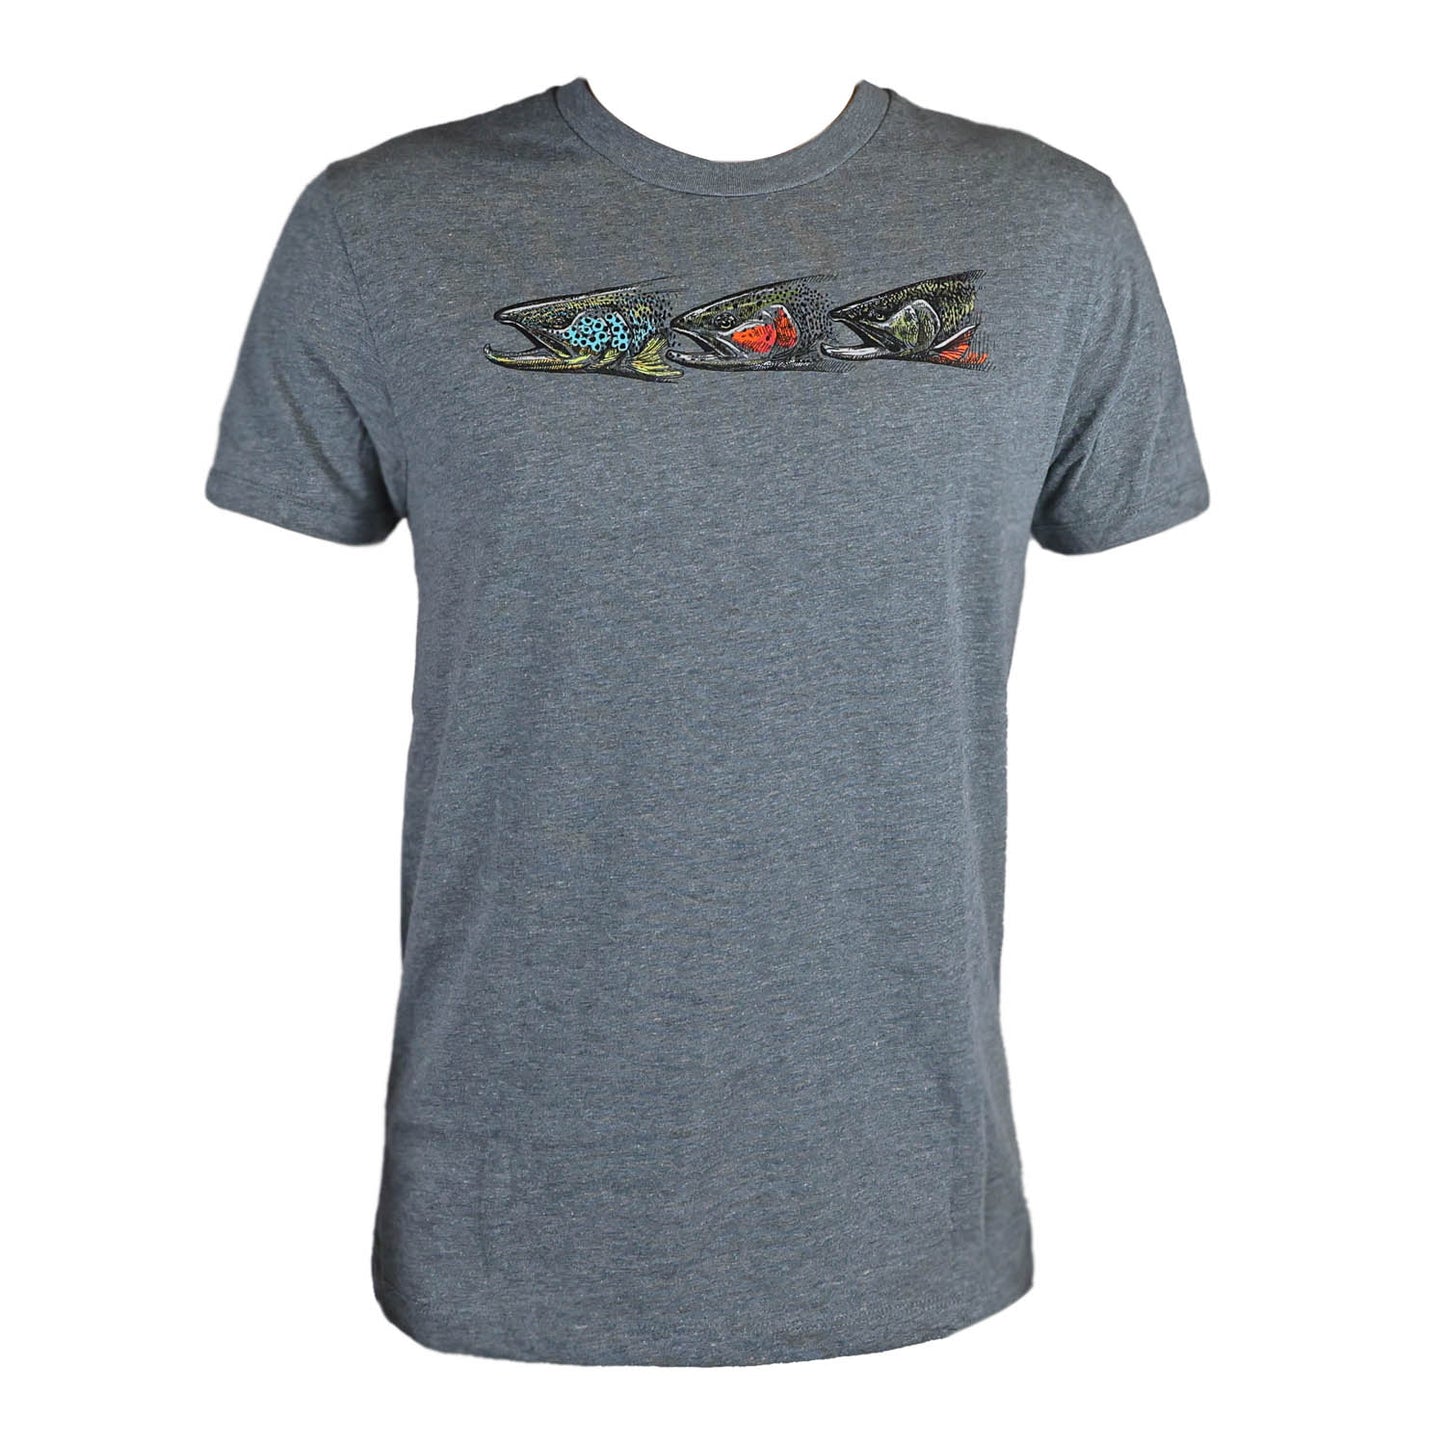 A gray shirt featuring 3 trout heads on the front 